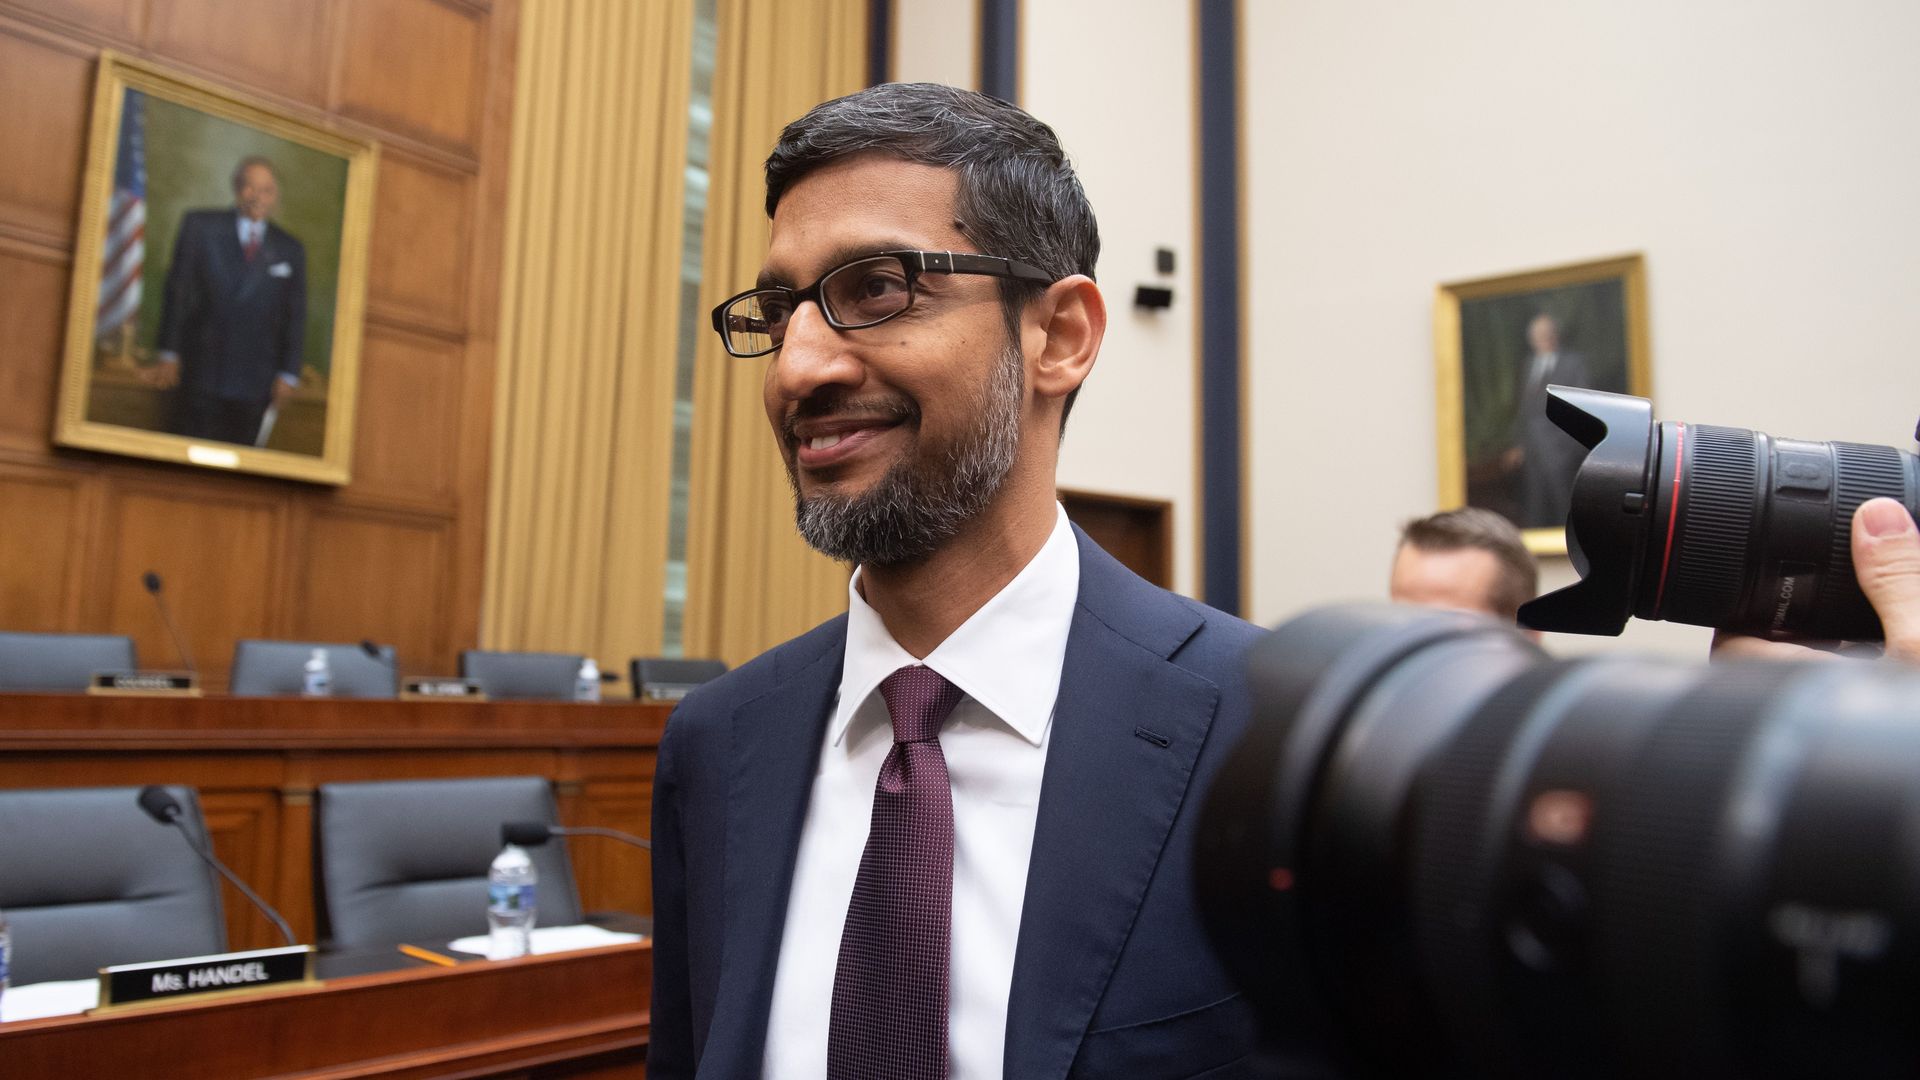 Sundar Pichai arrives to testify, with cameras on the right